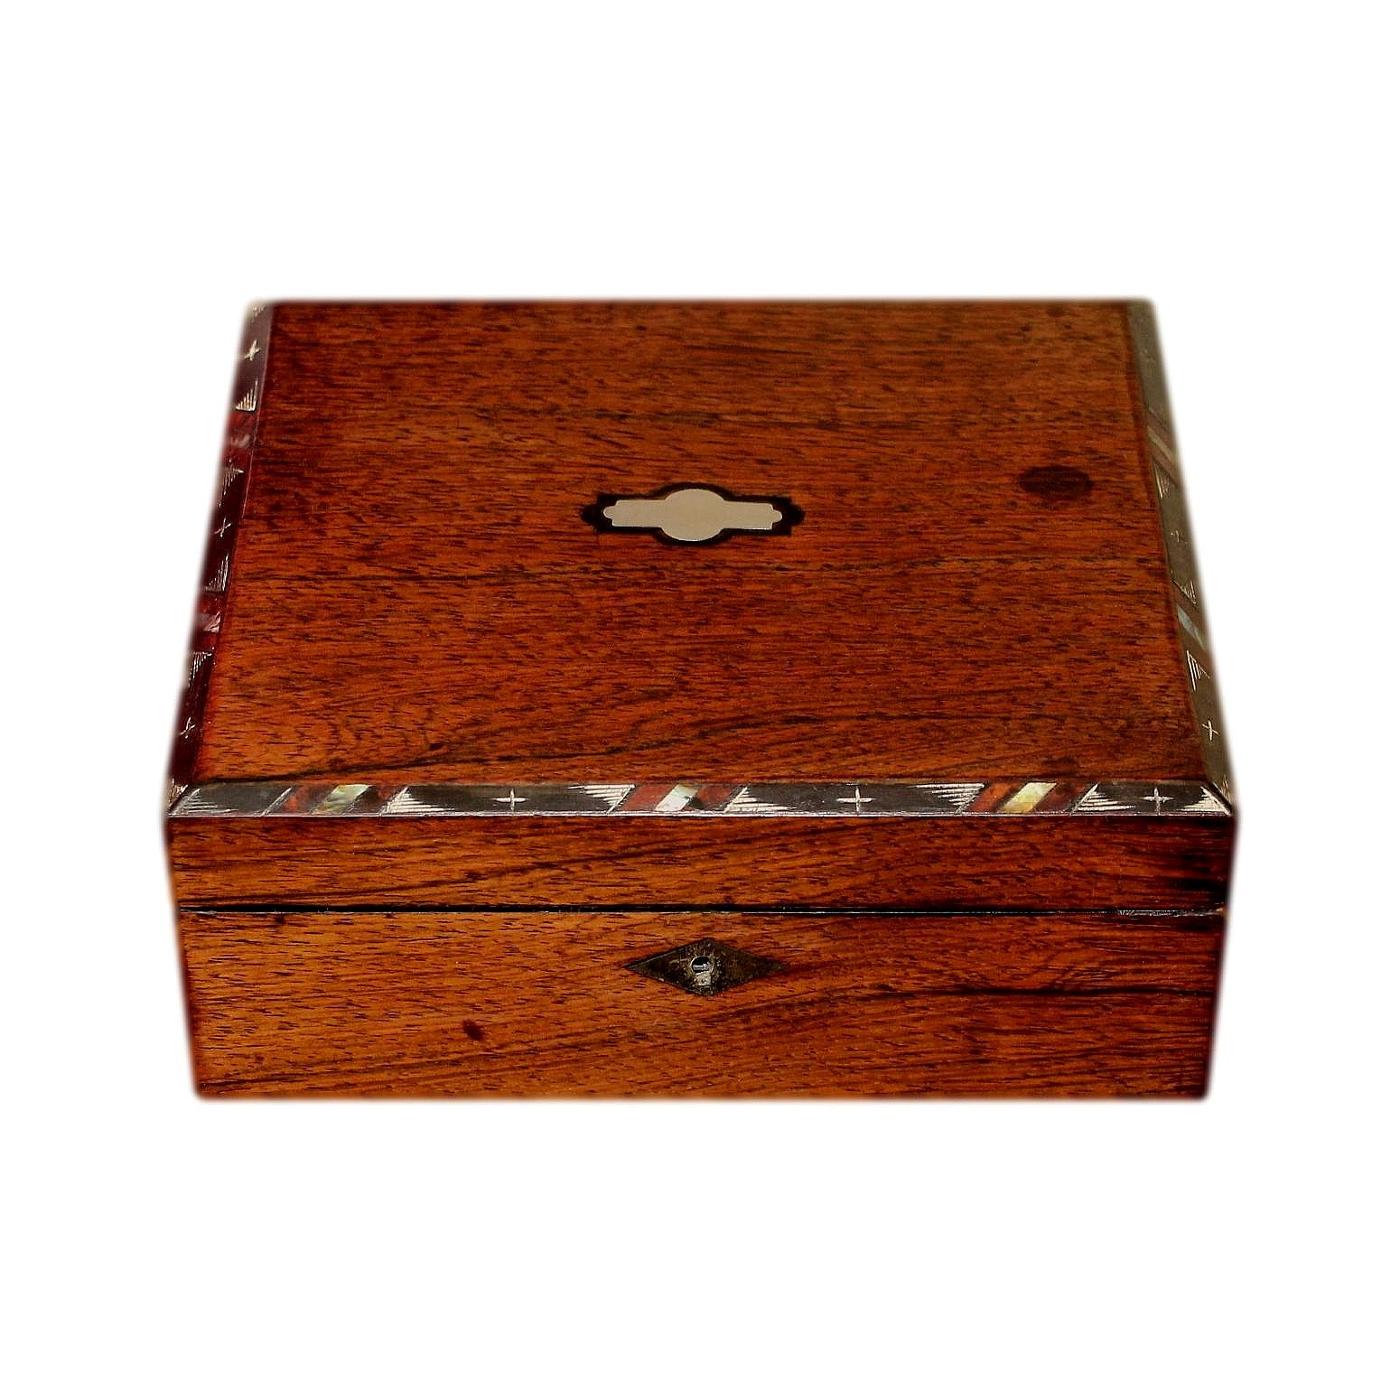 Lovely Refurbished Inlaid Antique Jewellery Box